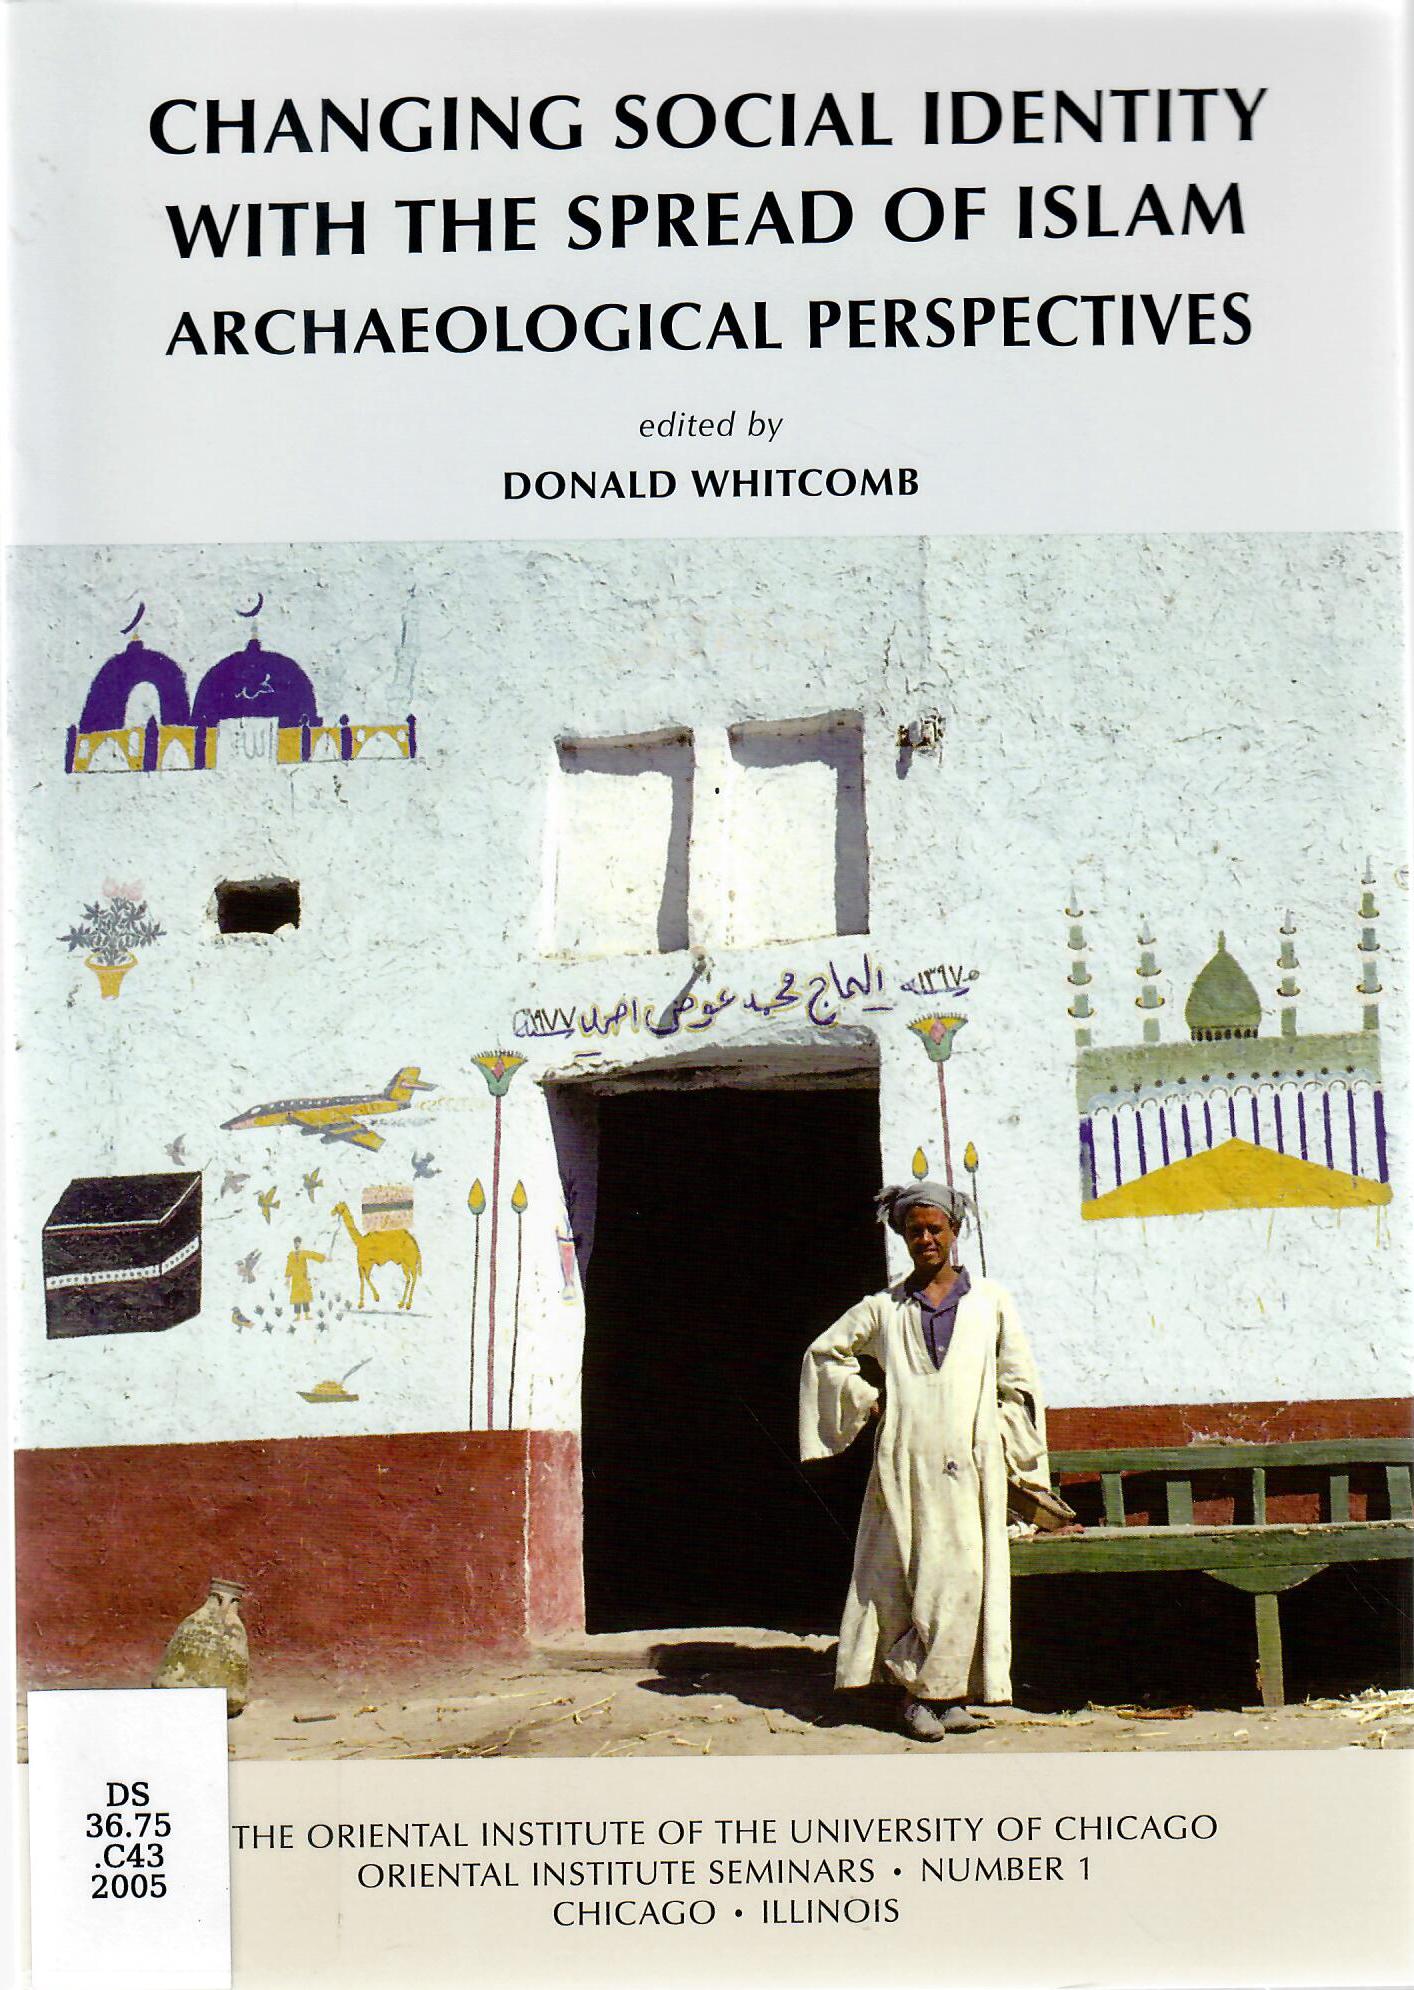 CHANGING SOCIAL IDENTITY WITH THE SPREAD OF ISLAM ARCHAEOLOGICAL PERSPECTIVES